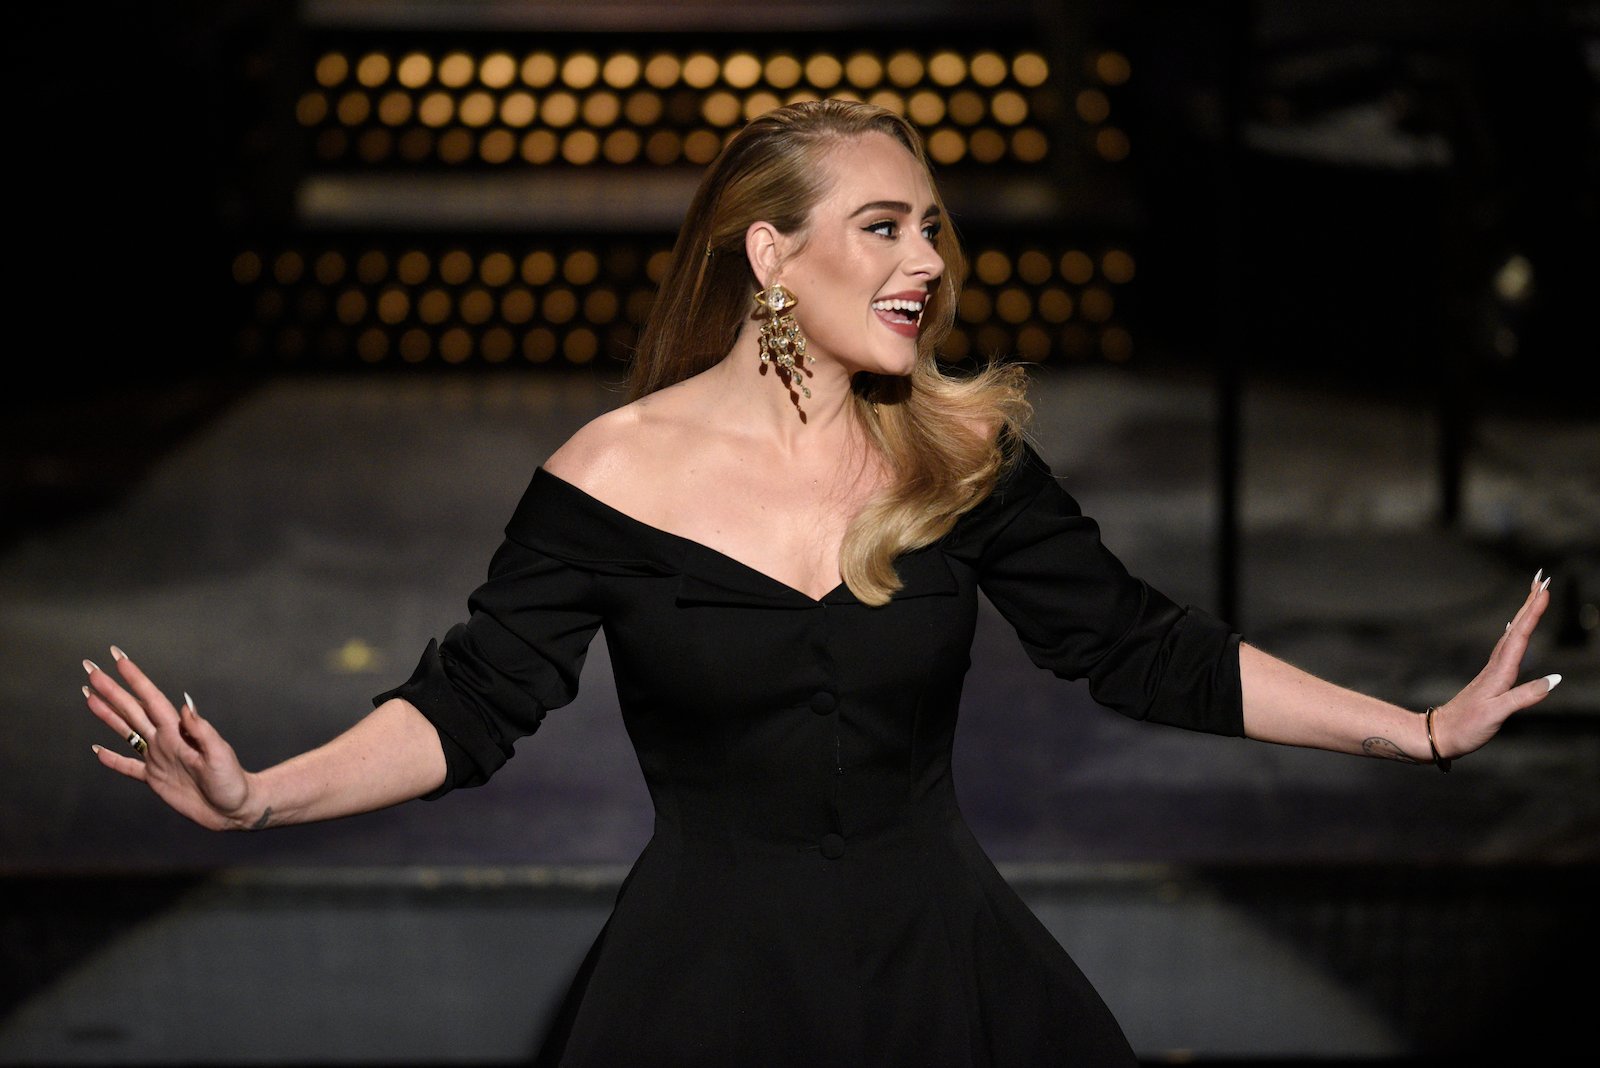 Adele wears a black outfit while hosting 'Saturday Night Live' during the opening monologue